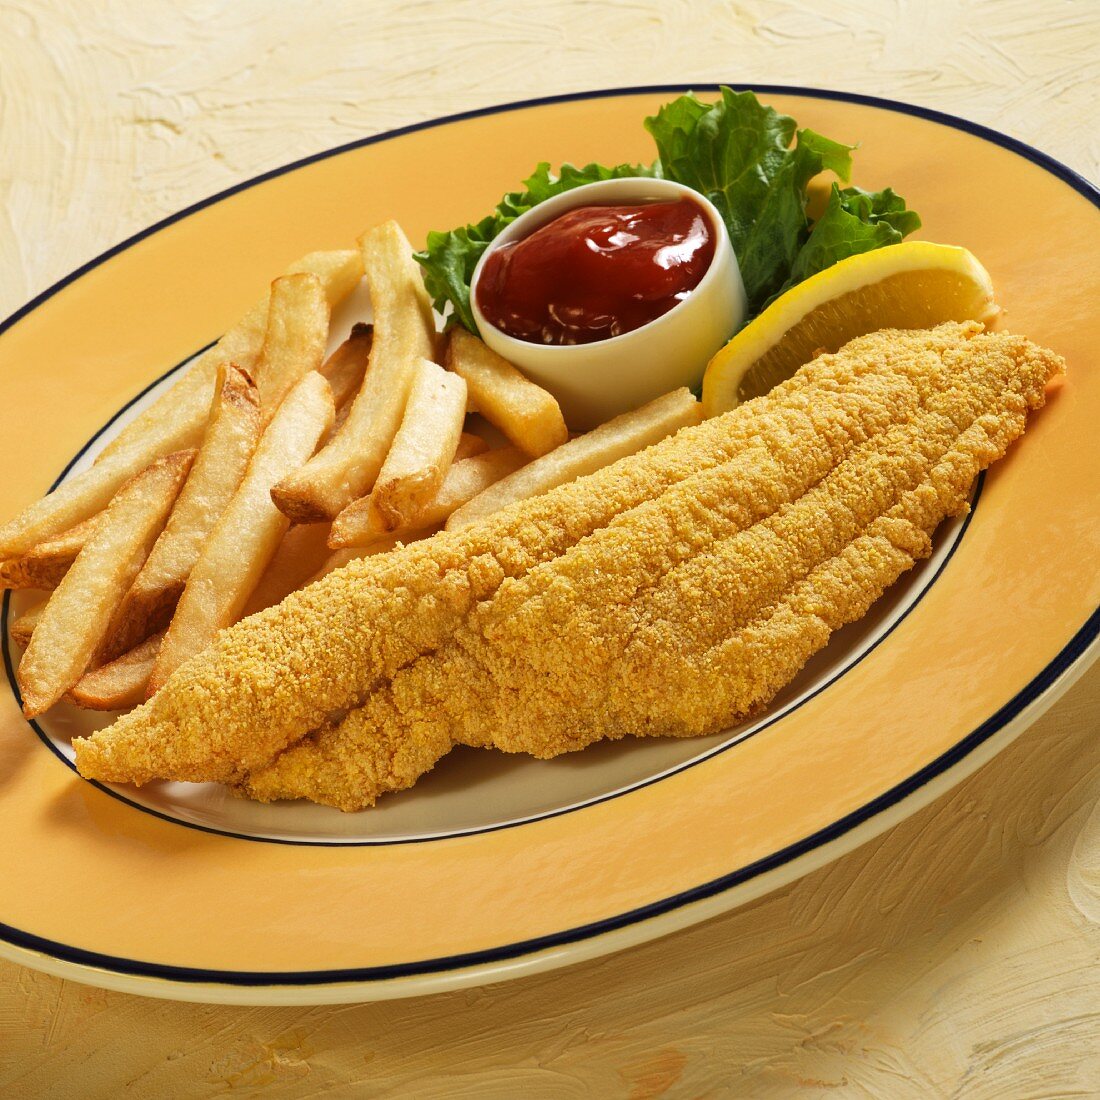 Catfish with a cornflour coating served with fries, lemon and ketchup